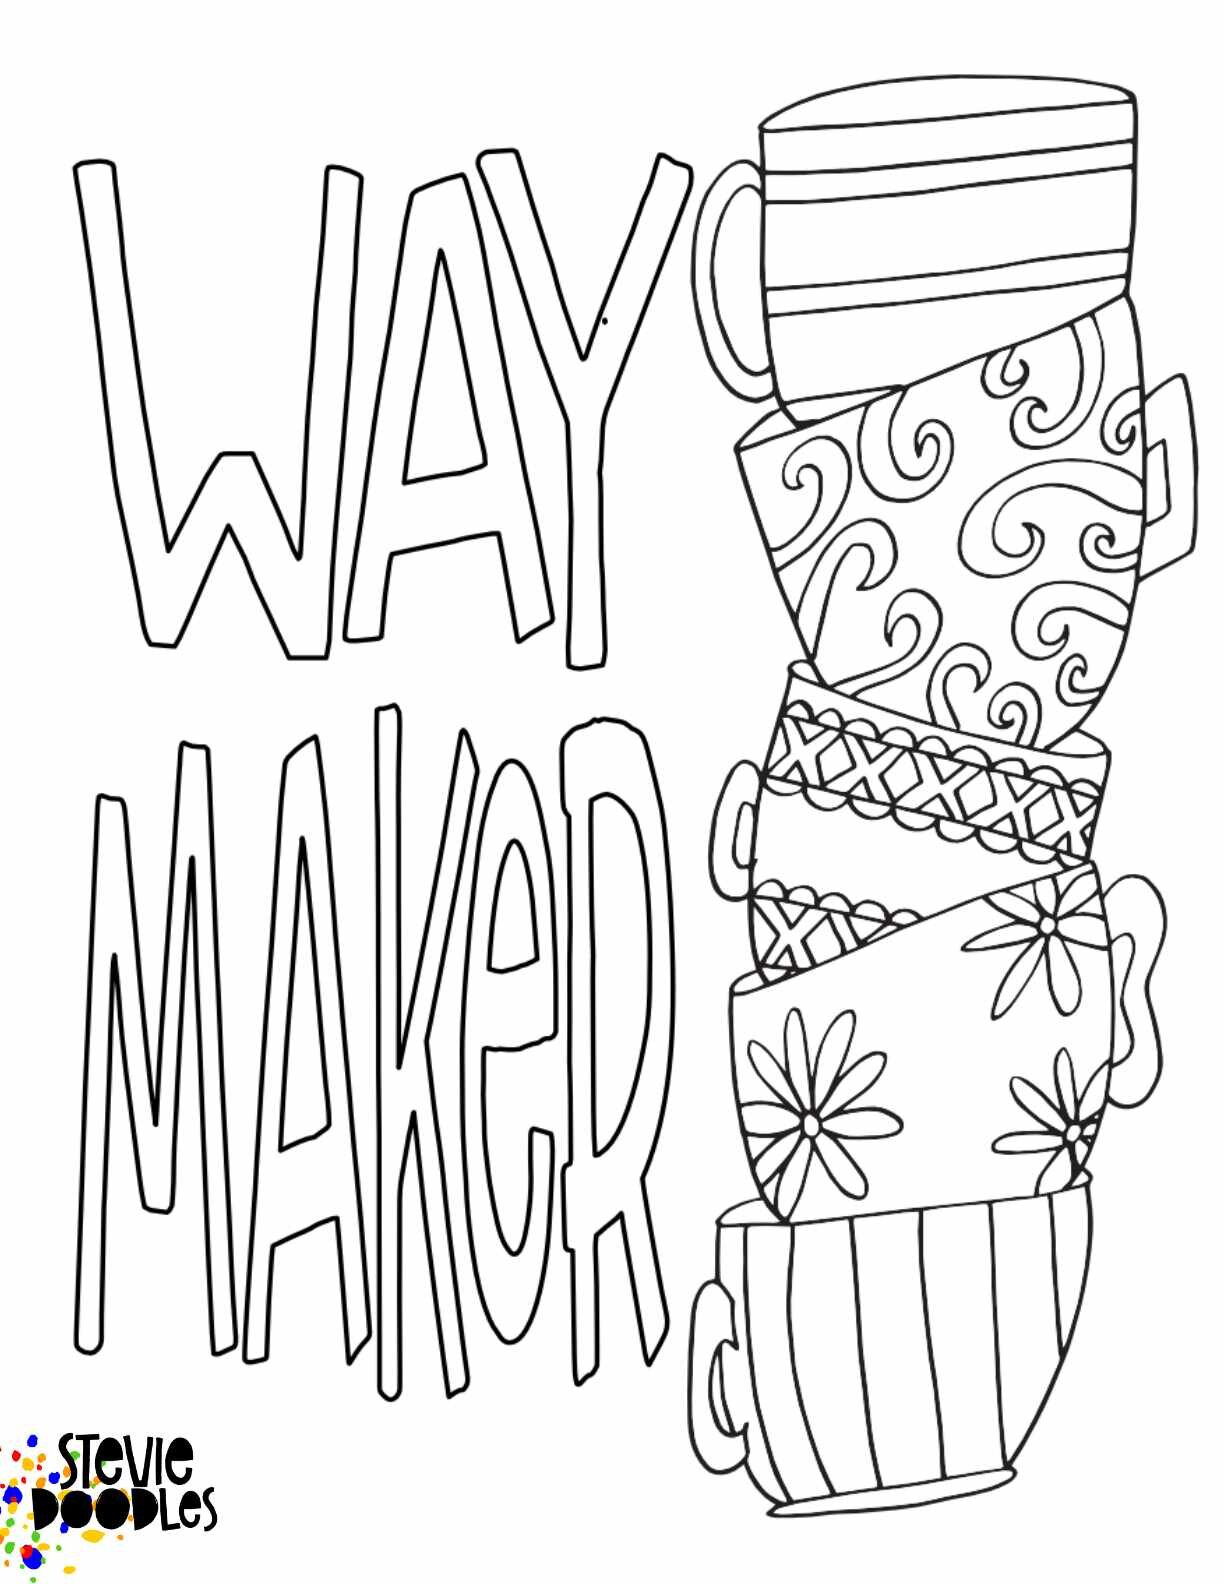 3 FREE COLORING PAGES - Way Maker, Miracle Worker, Promise Keeper